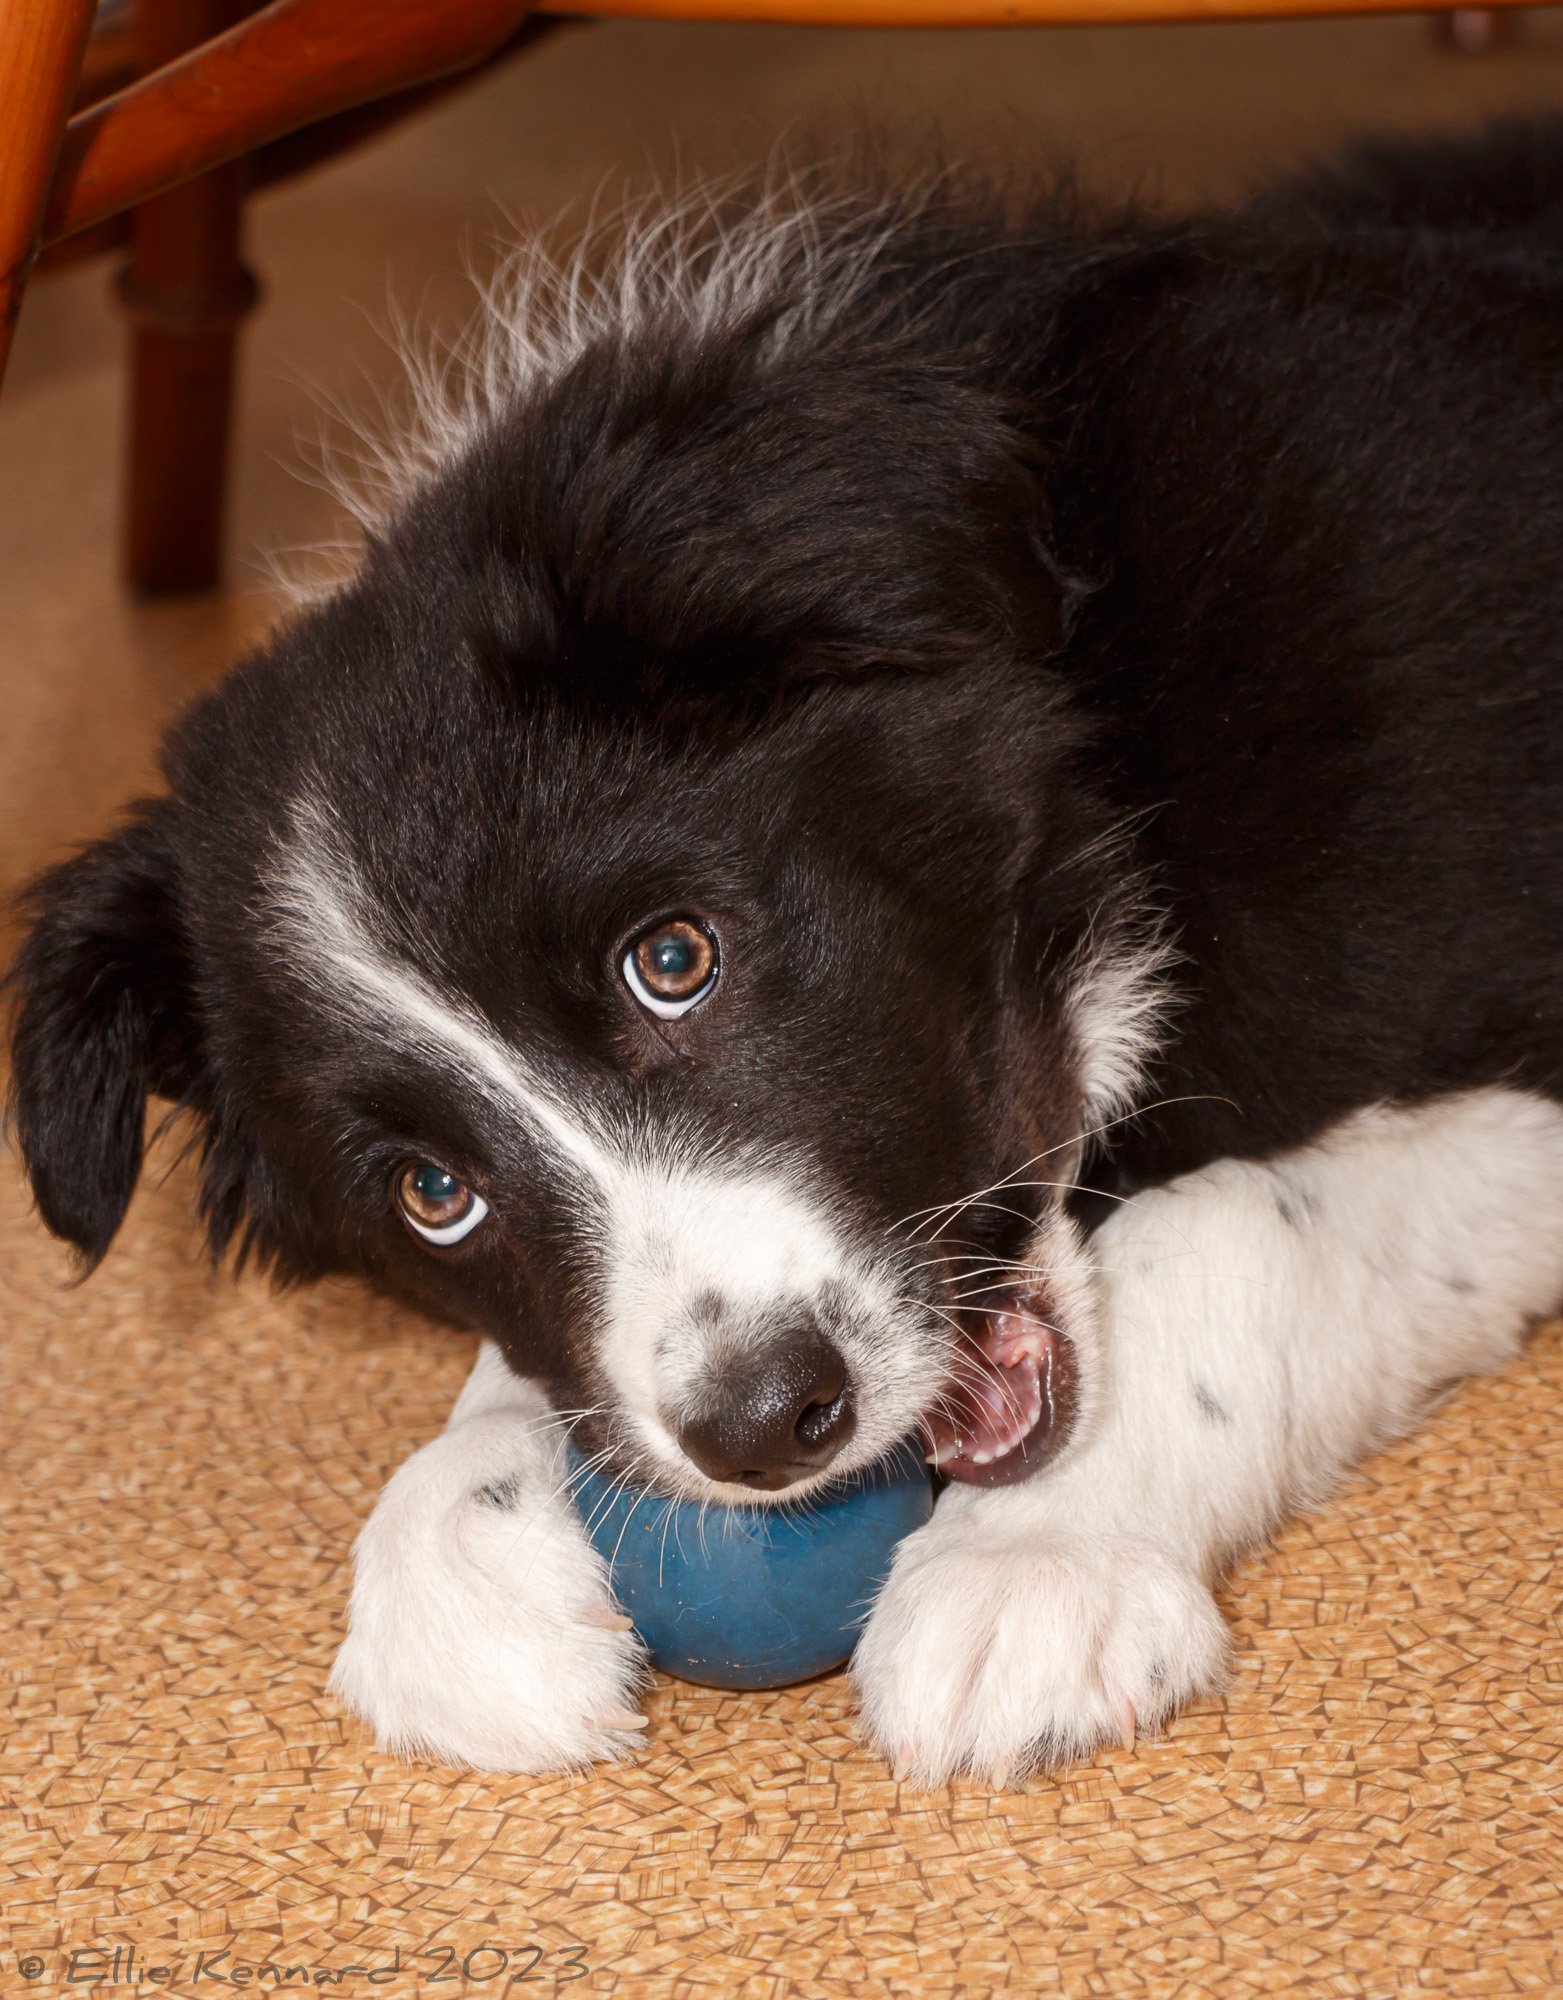 A black and white border collie pup is lying on some old beige floor lino. She has a blue ball between her white paws and has her mouth over it, chewing it. She is looking up at the camera sideways, with her lovely brown collie eyes.